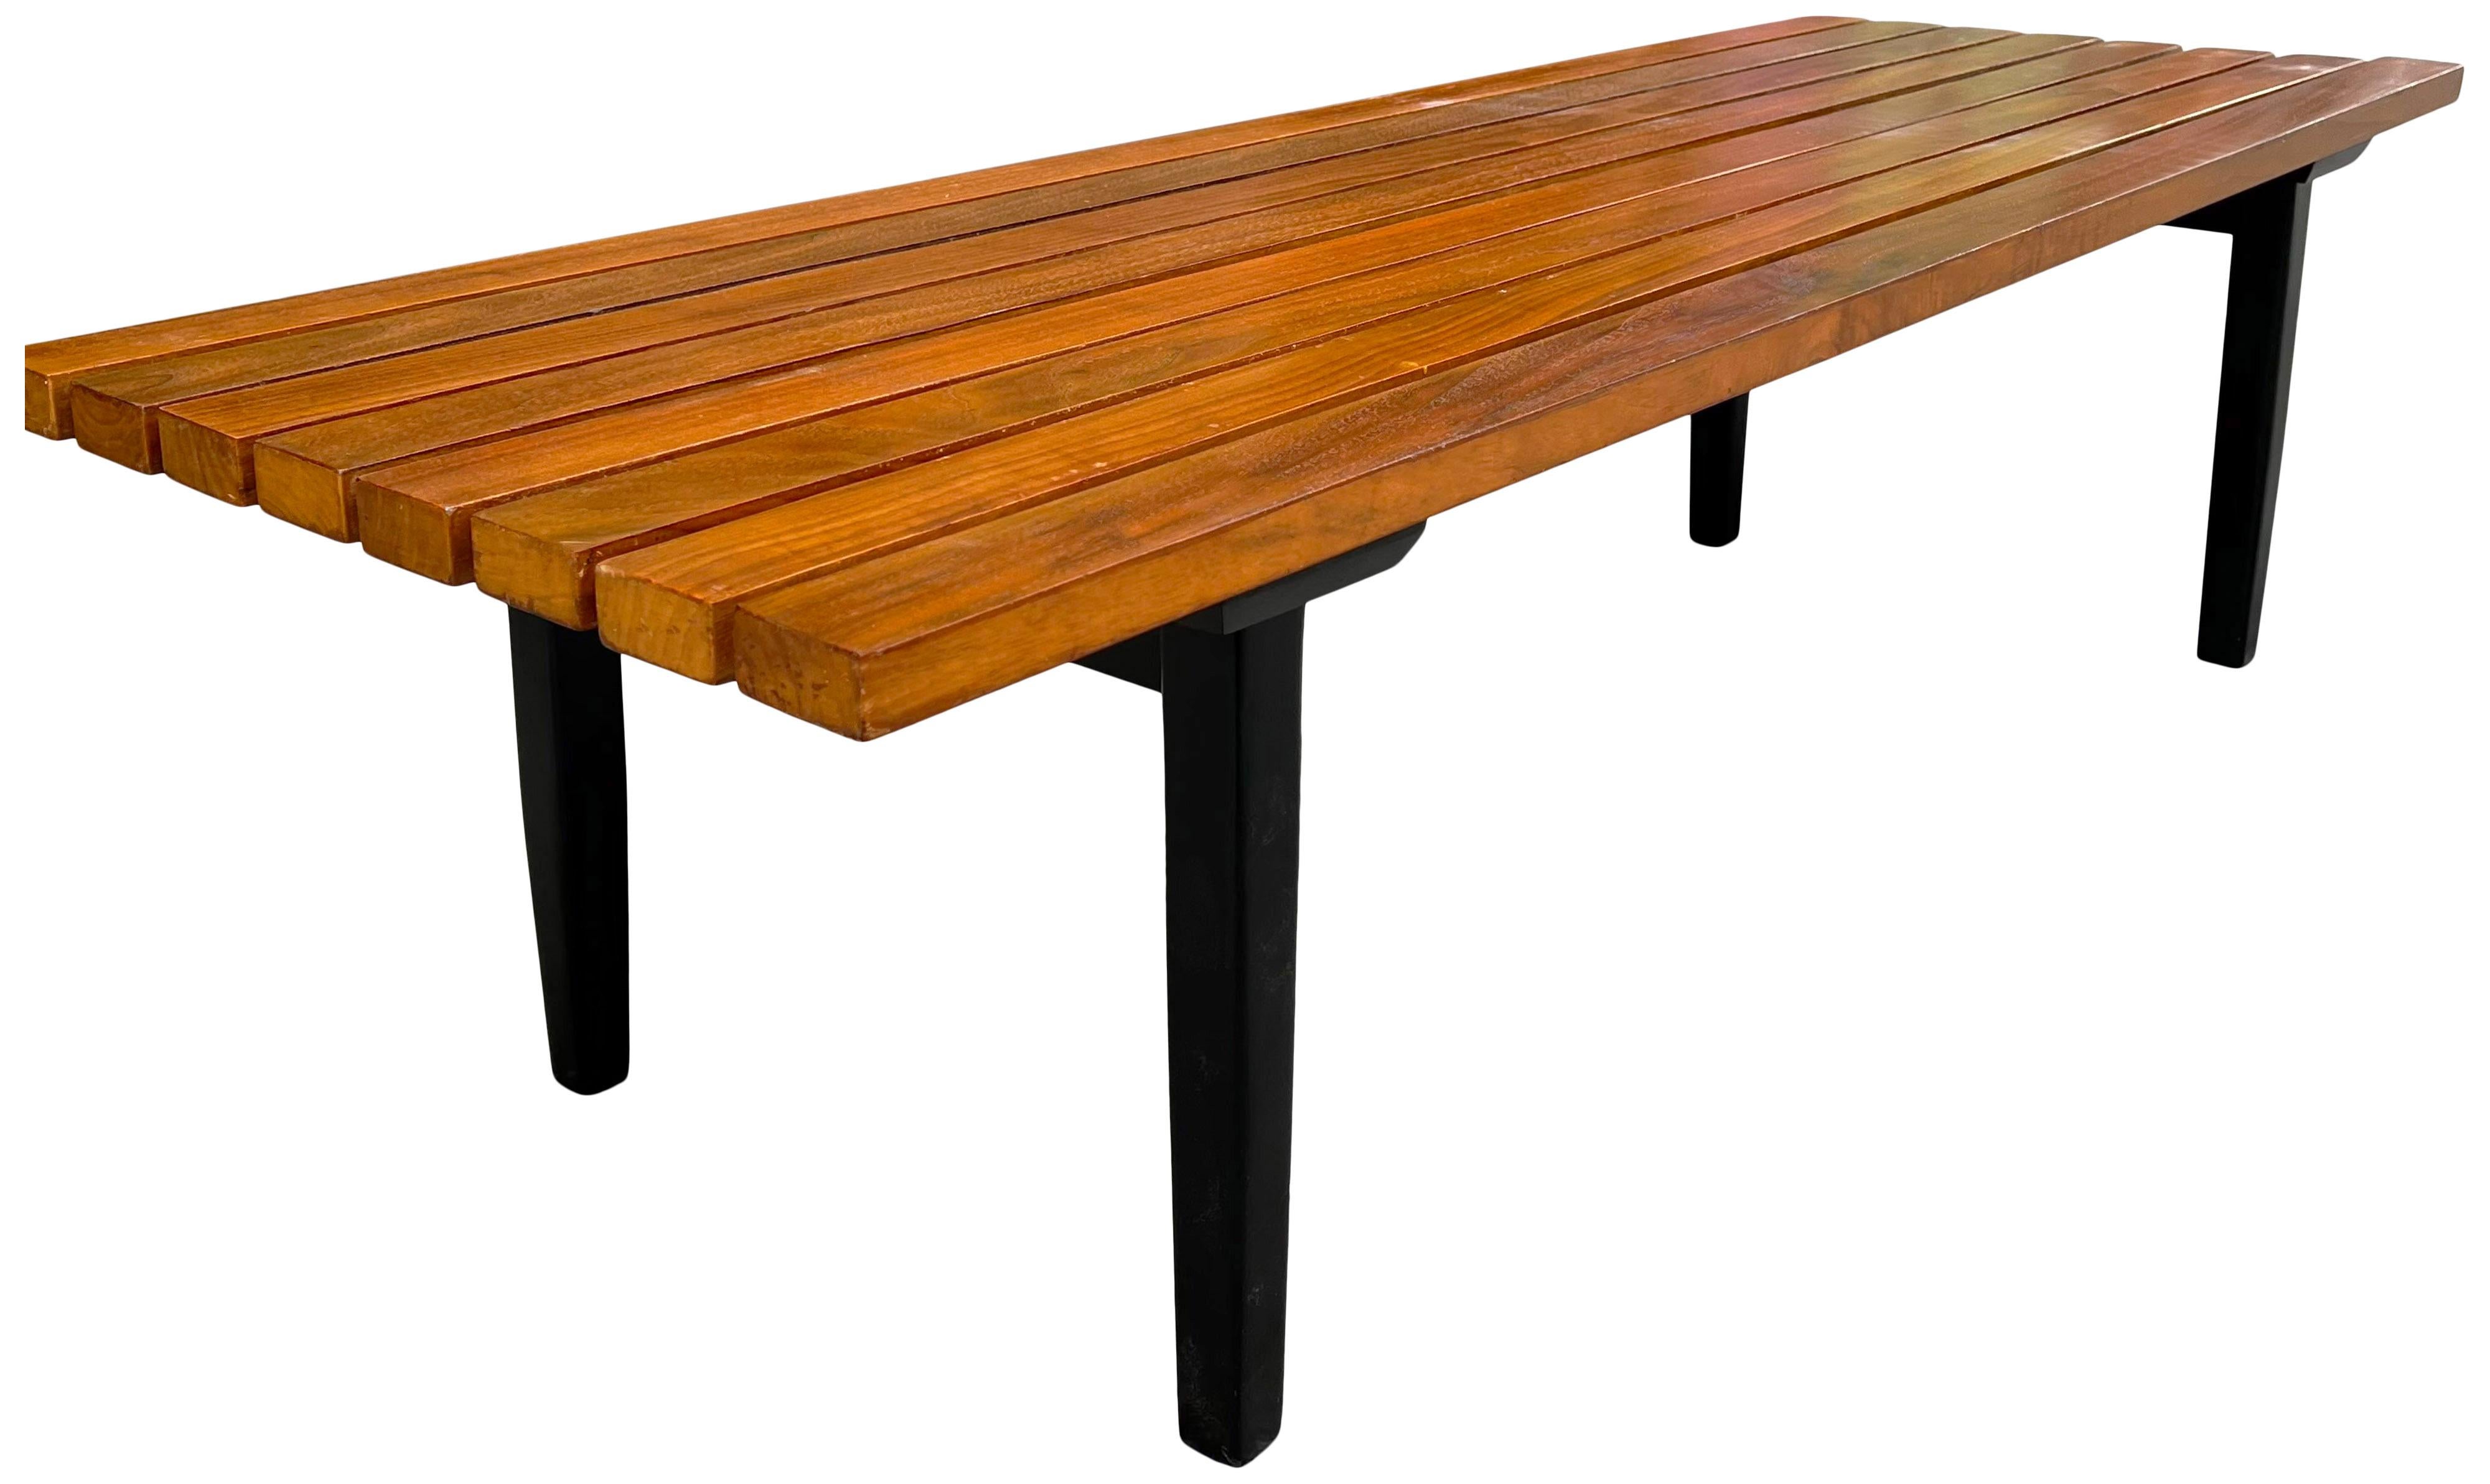 Beautiful slat bench or coffee table wood top on black Lacquer base. Superior construction and very sturdy having a larger then average depth to the stat top.

American mid century item with gorgeous patina and showing very little use.